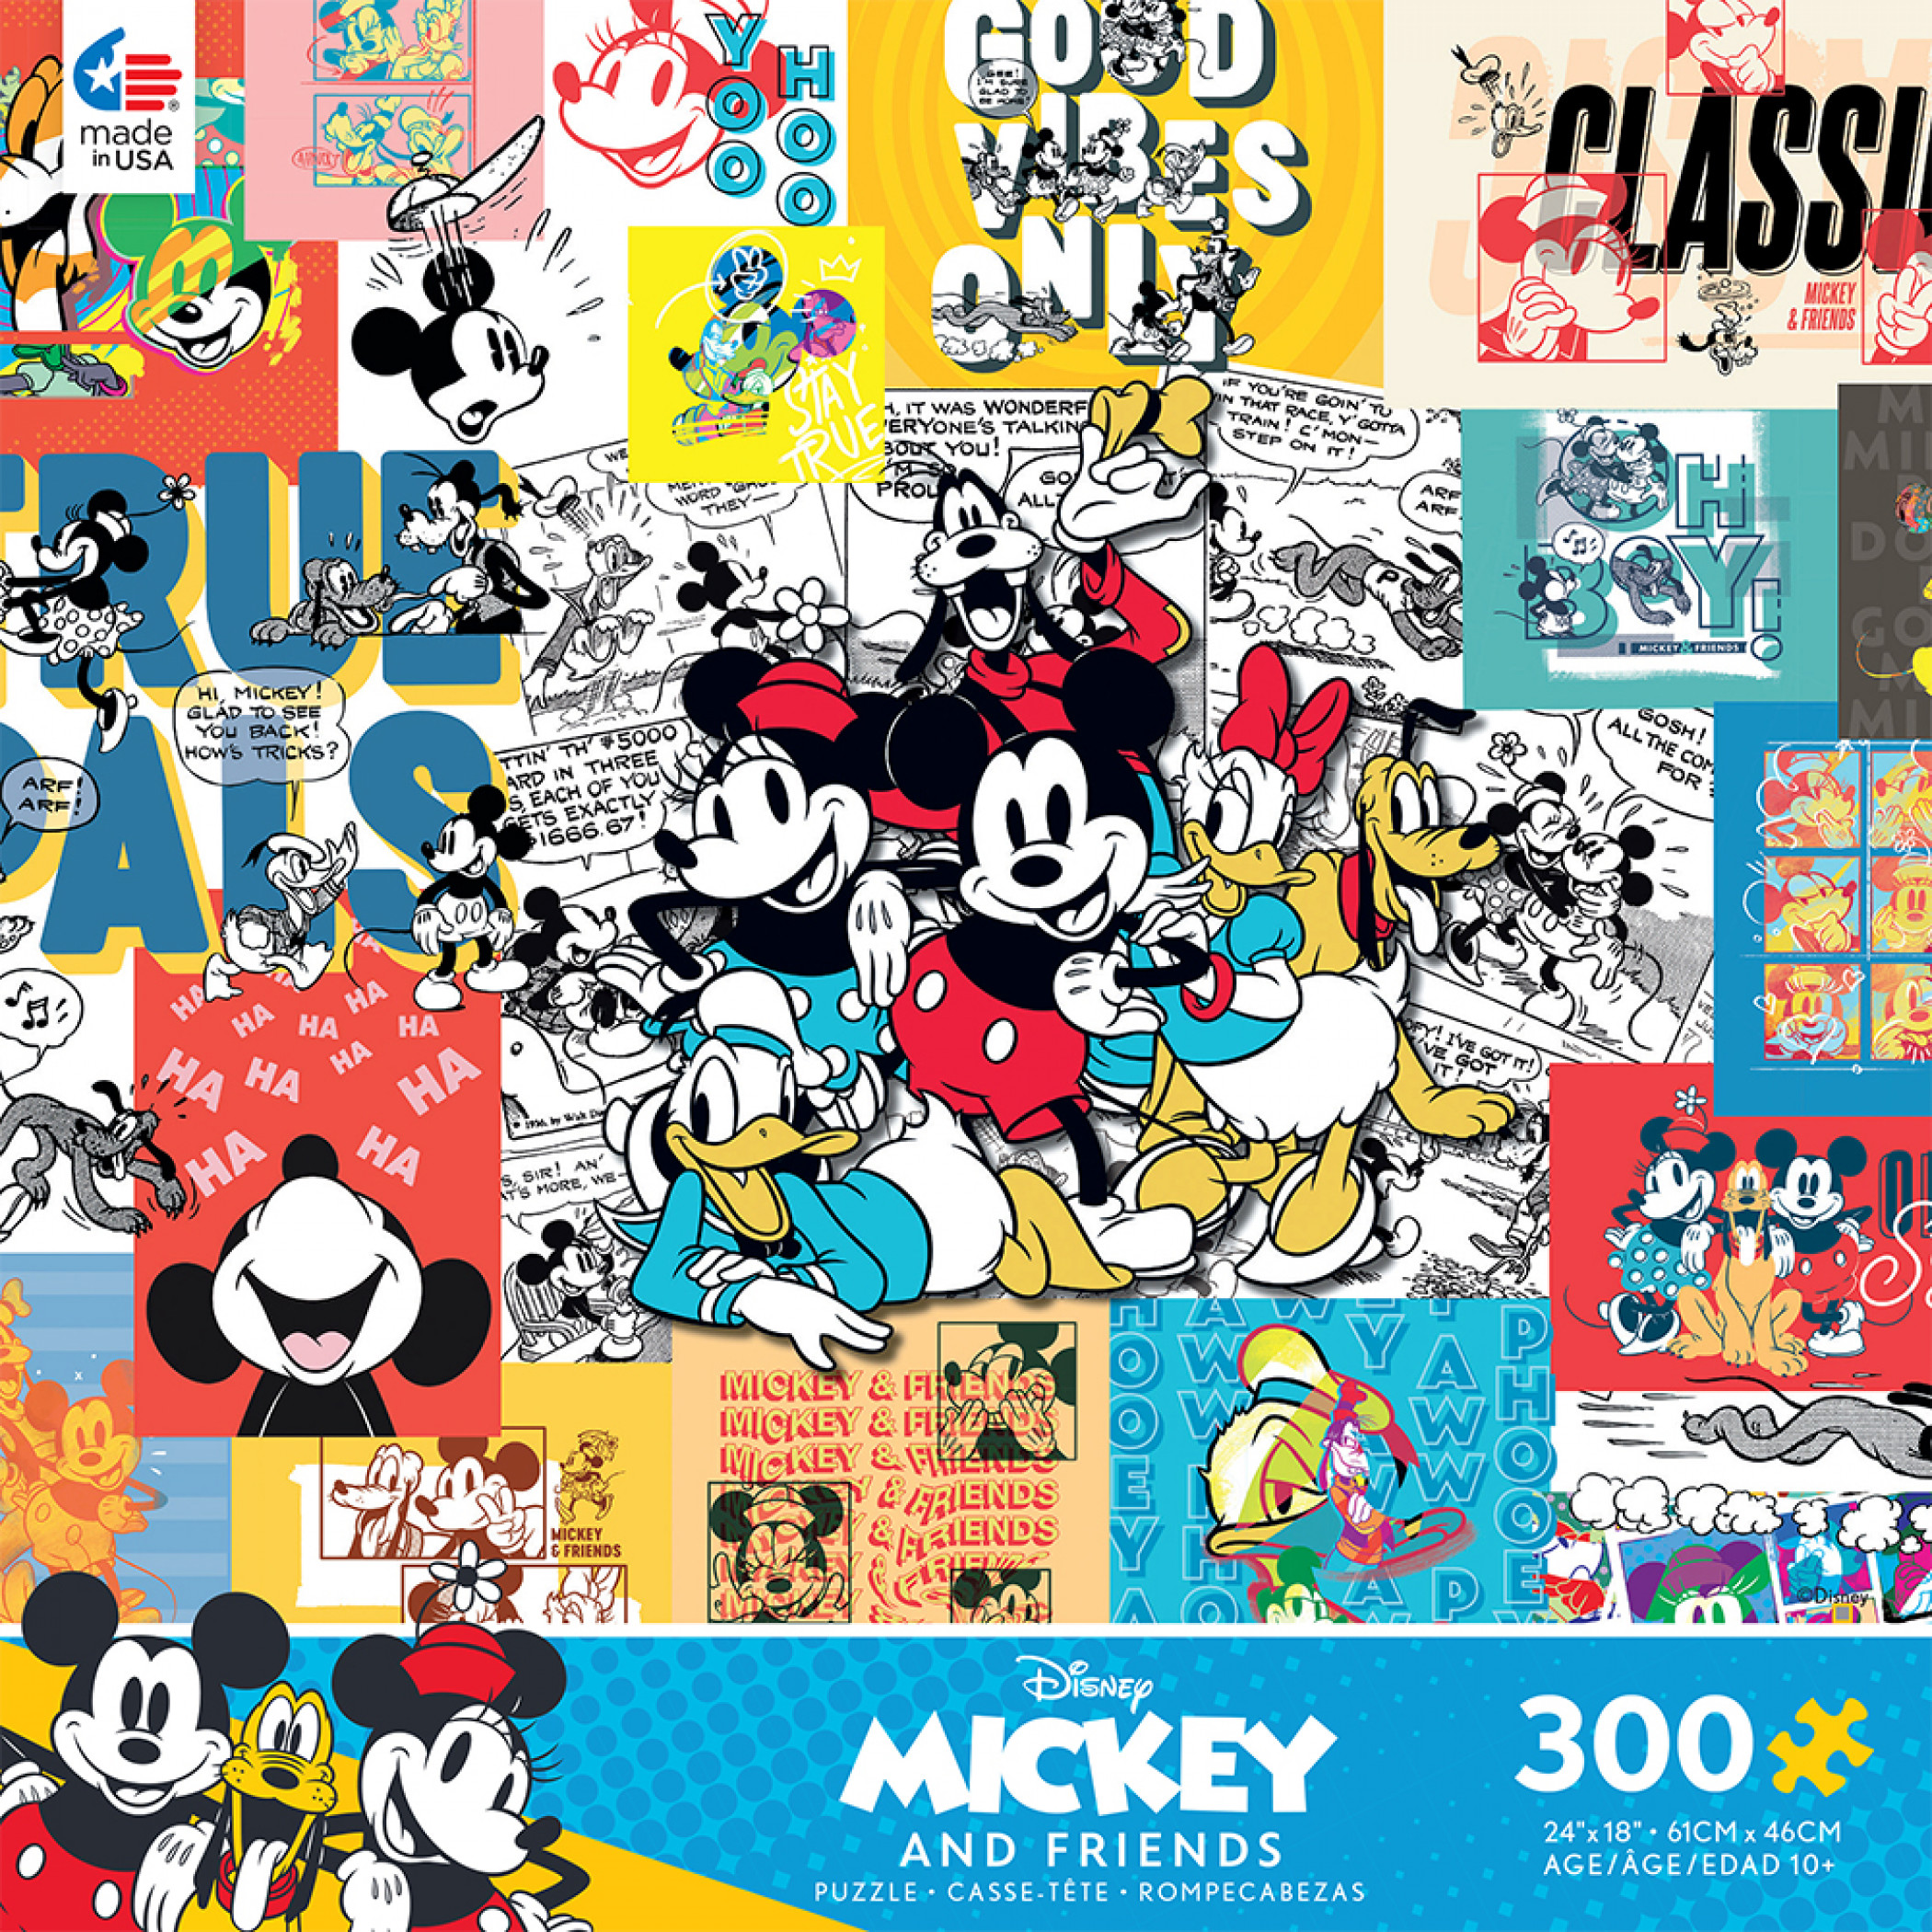 Disney Classic Mickey and Friends Character 300 Piece Puzzle